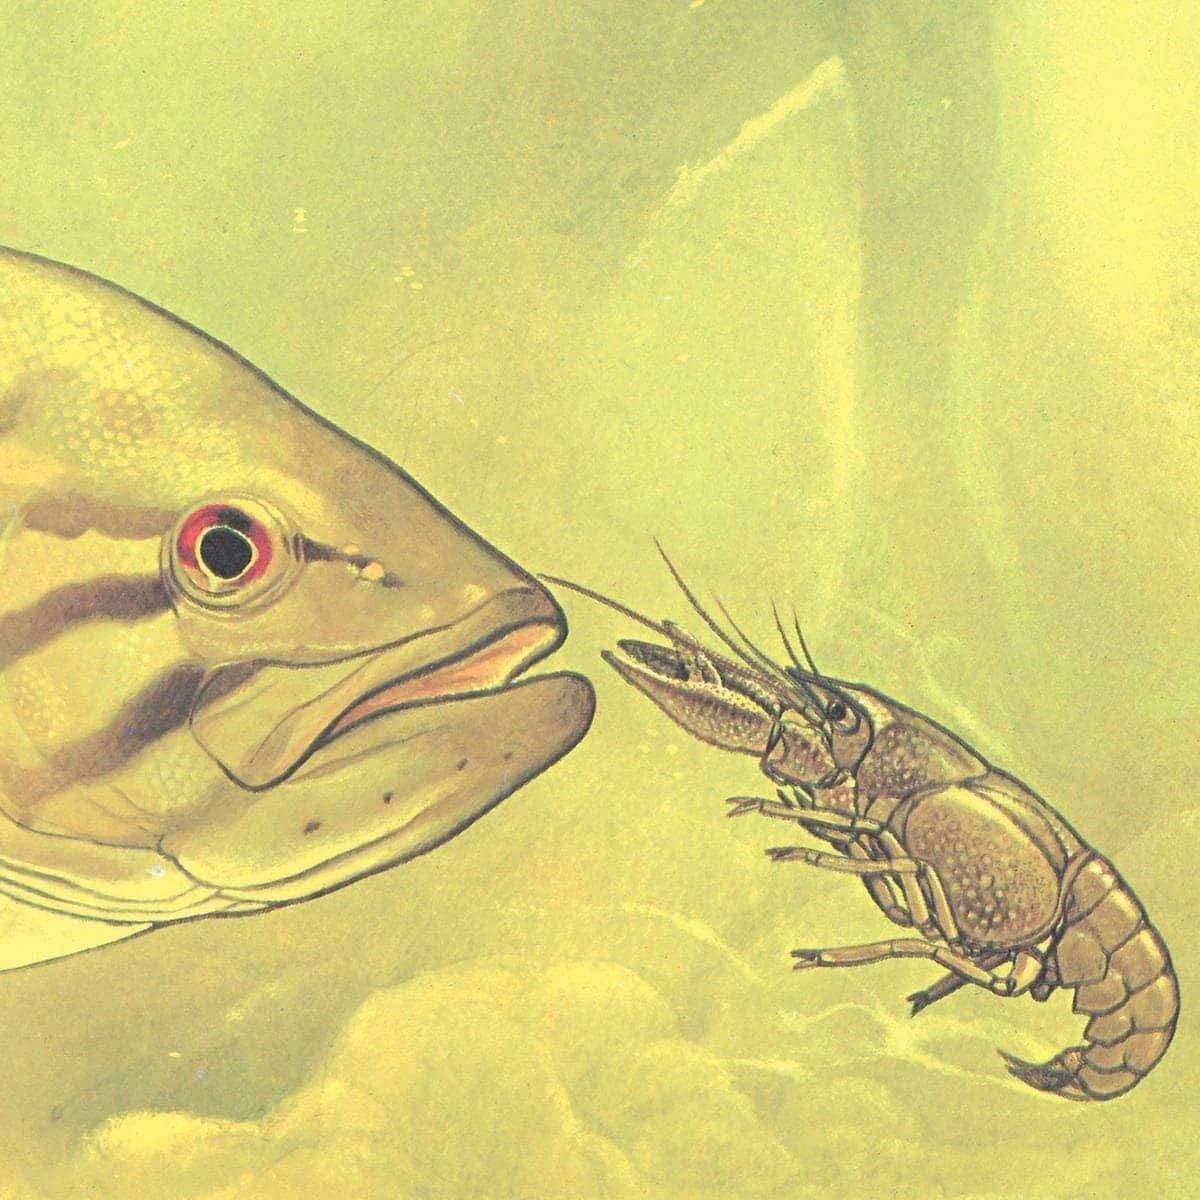 Small Mouth Bass Pursuing Crayfish - Canvas Print | Artwork by Glen Loates